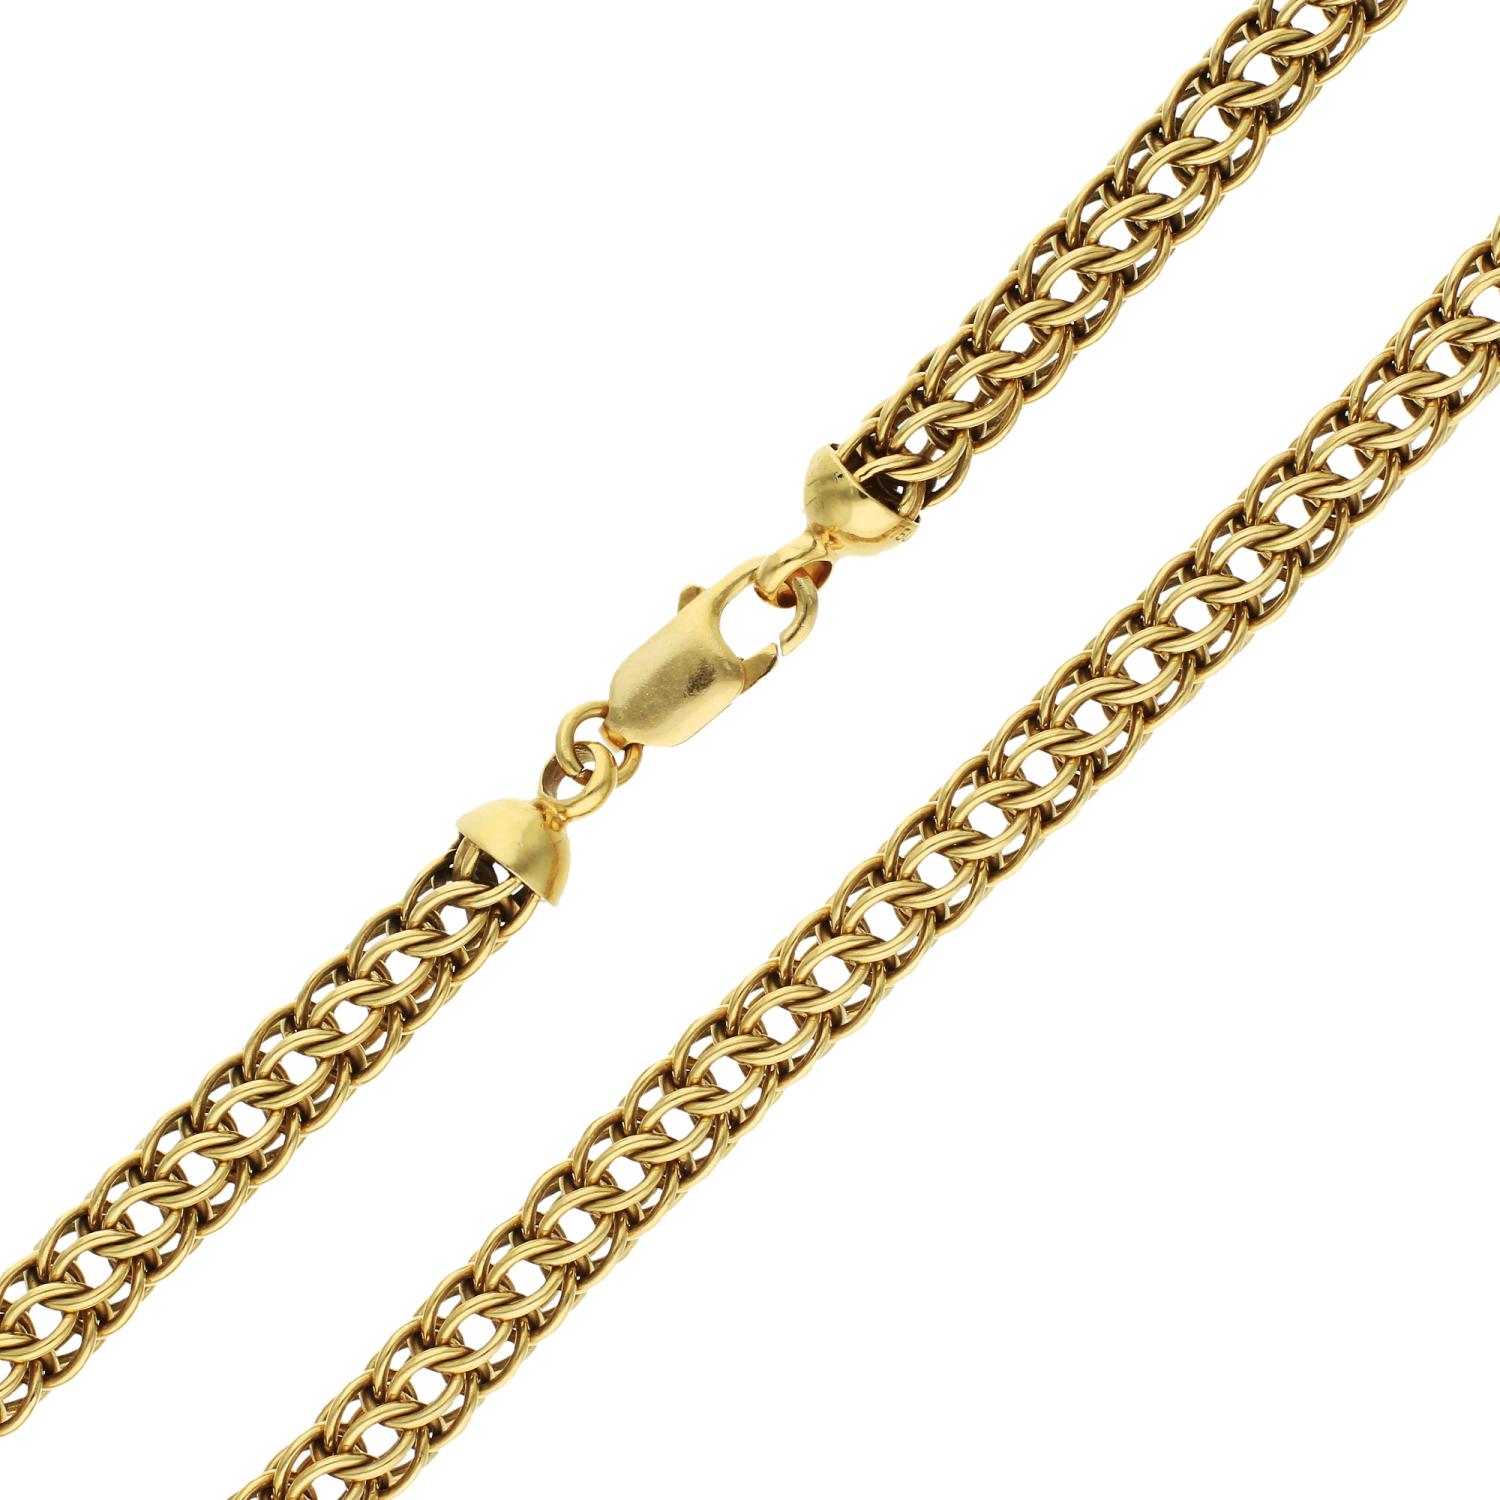 14ct Yellow Gold Round Link Chainmail Necklace 65.60g

Step into a world of timeless elegance with our pre-owned 14ct yellow gold chainmail necklace. This exquisite piece, with a length of 16 inches, reimagines the classic beauty of medieval